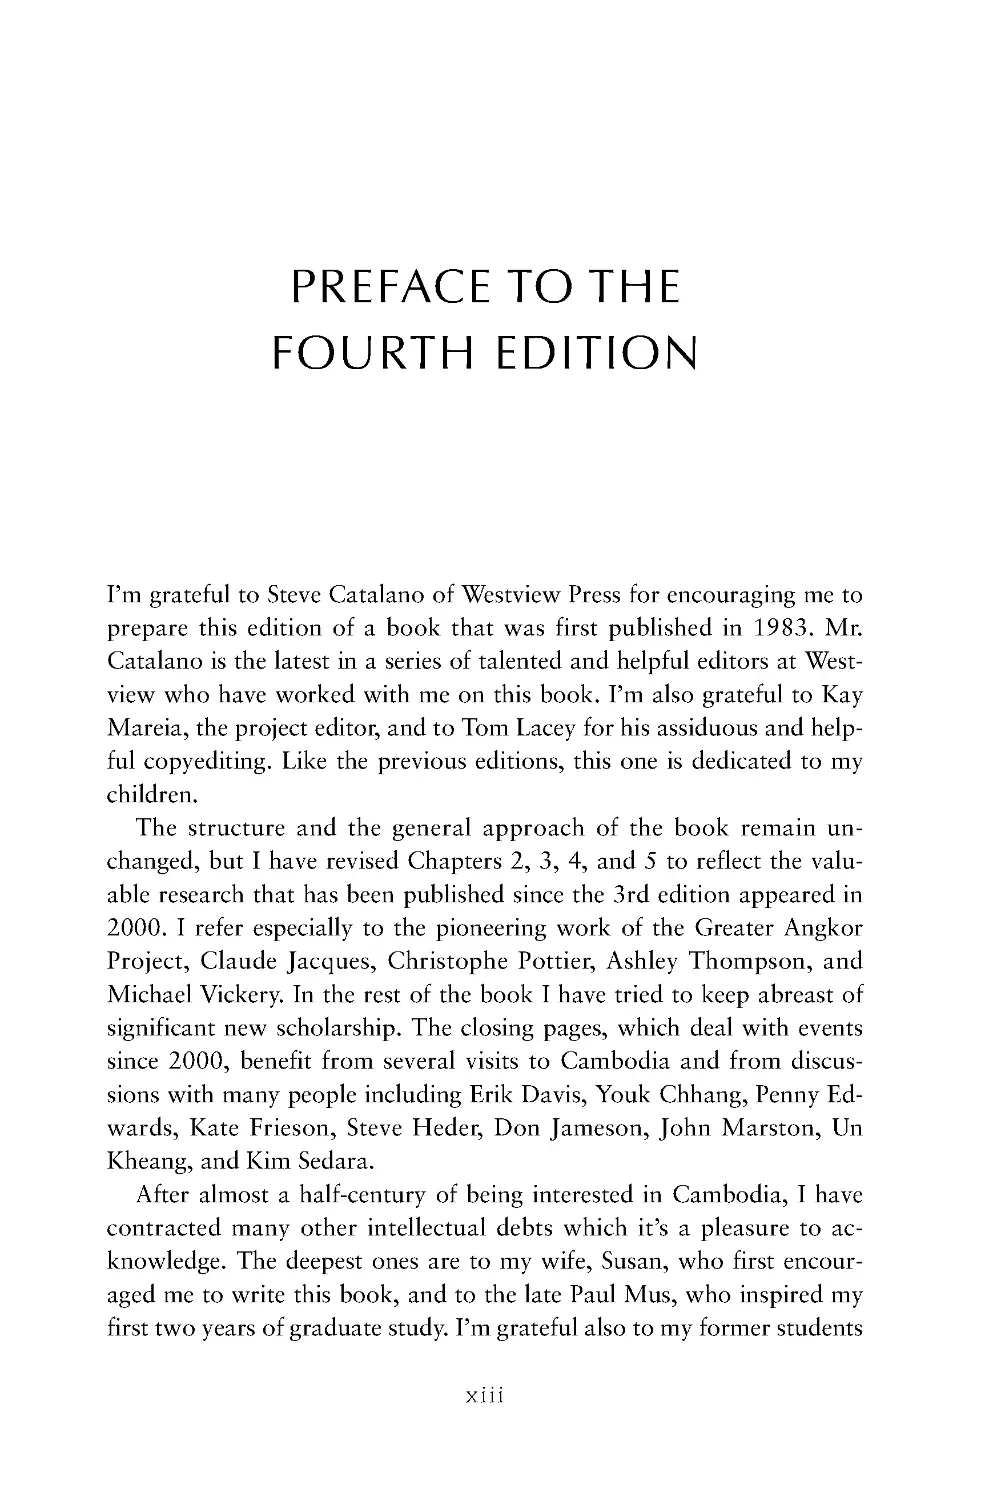 Preface to the Fourth Edition